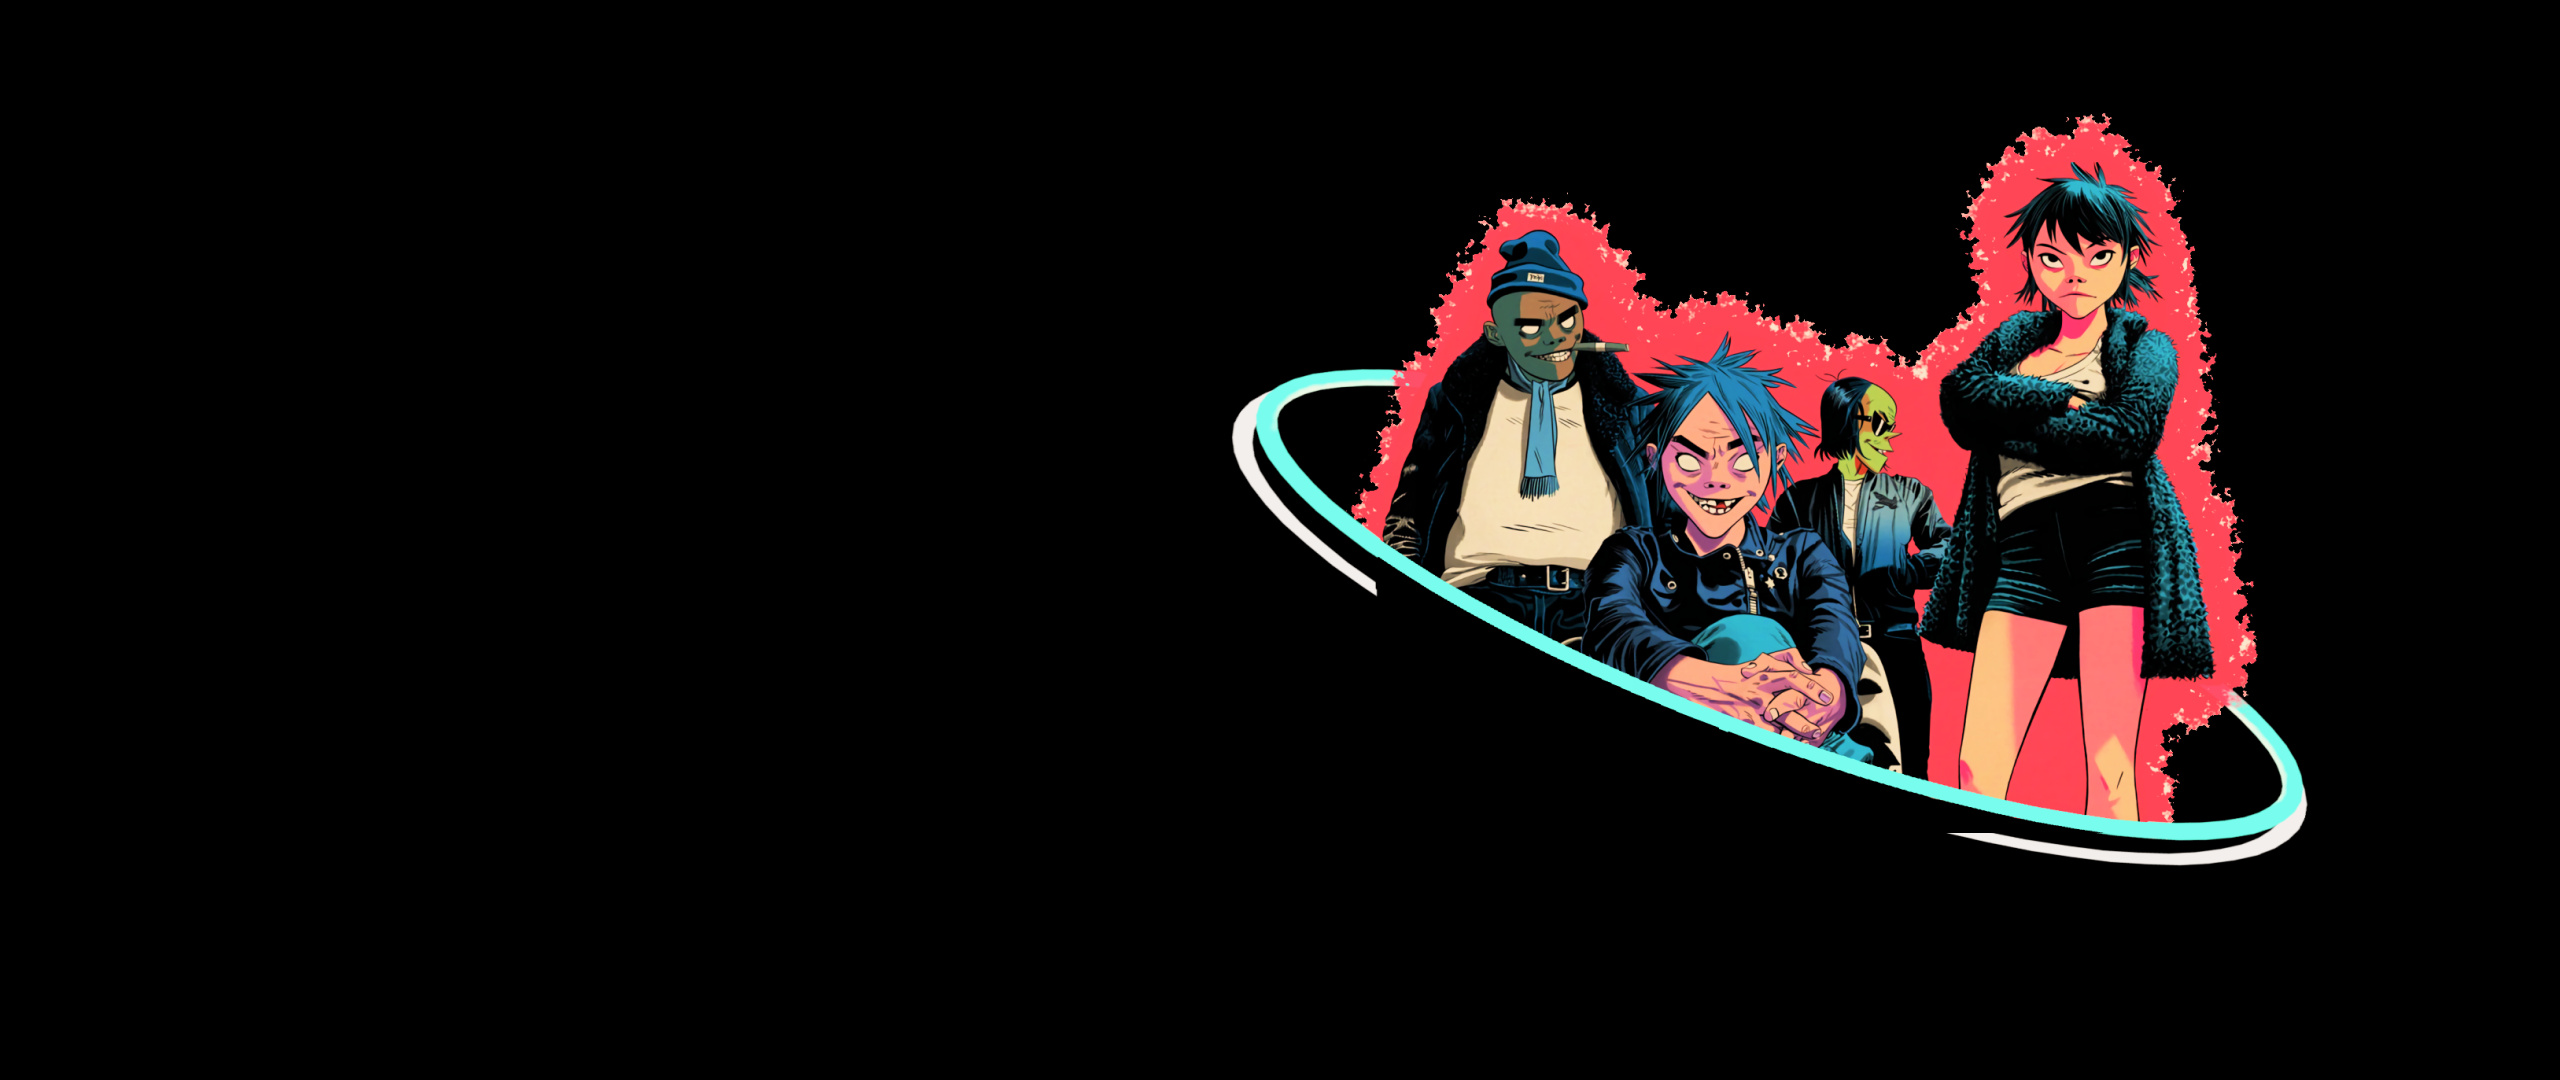 Gorillaz: The award-winning virtual group, Two decades of the animated electronic career. 2560x1080 Dual Screen Background.